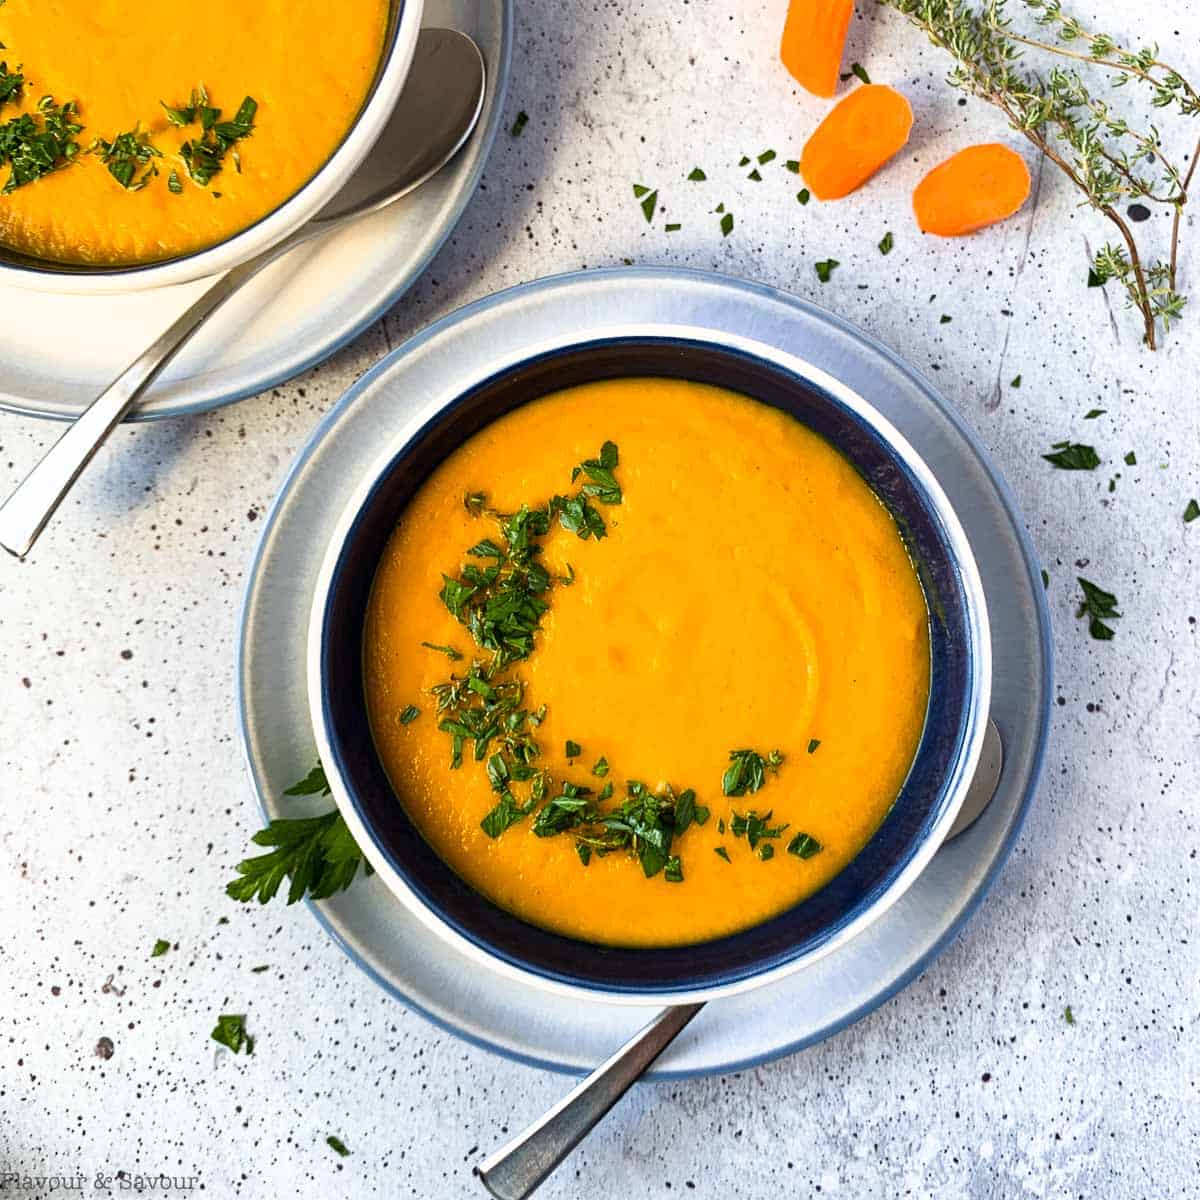 Carrot-Ginger Soup with Roasted Vegetables.jpg